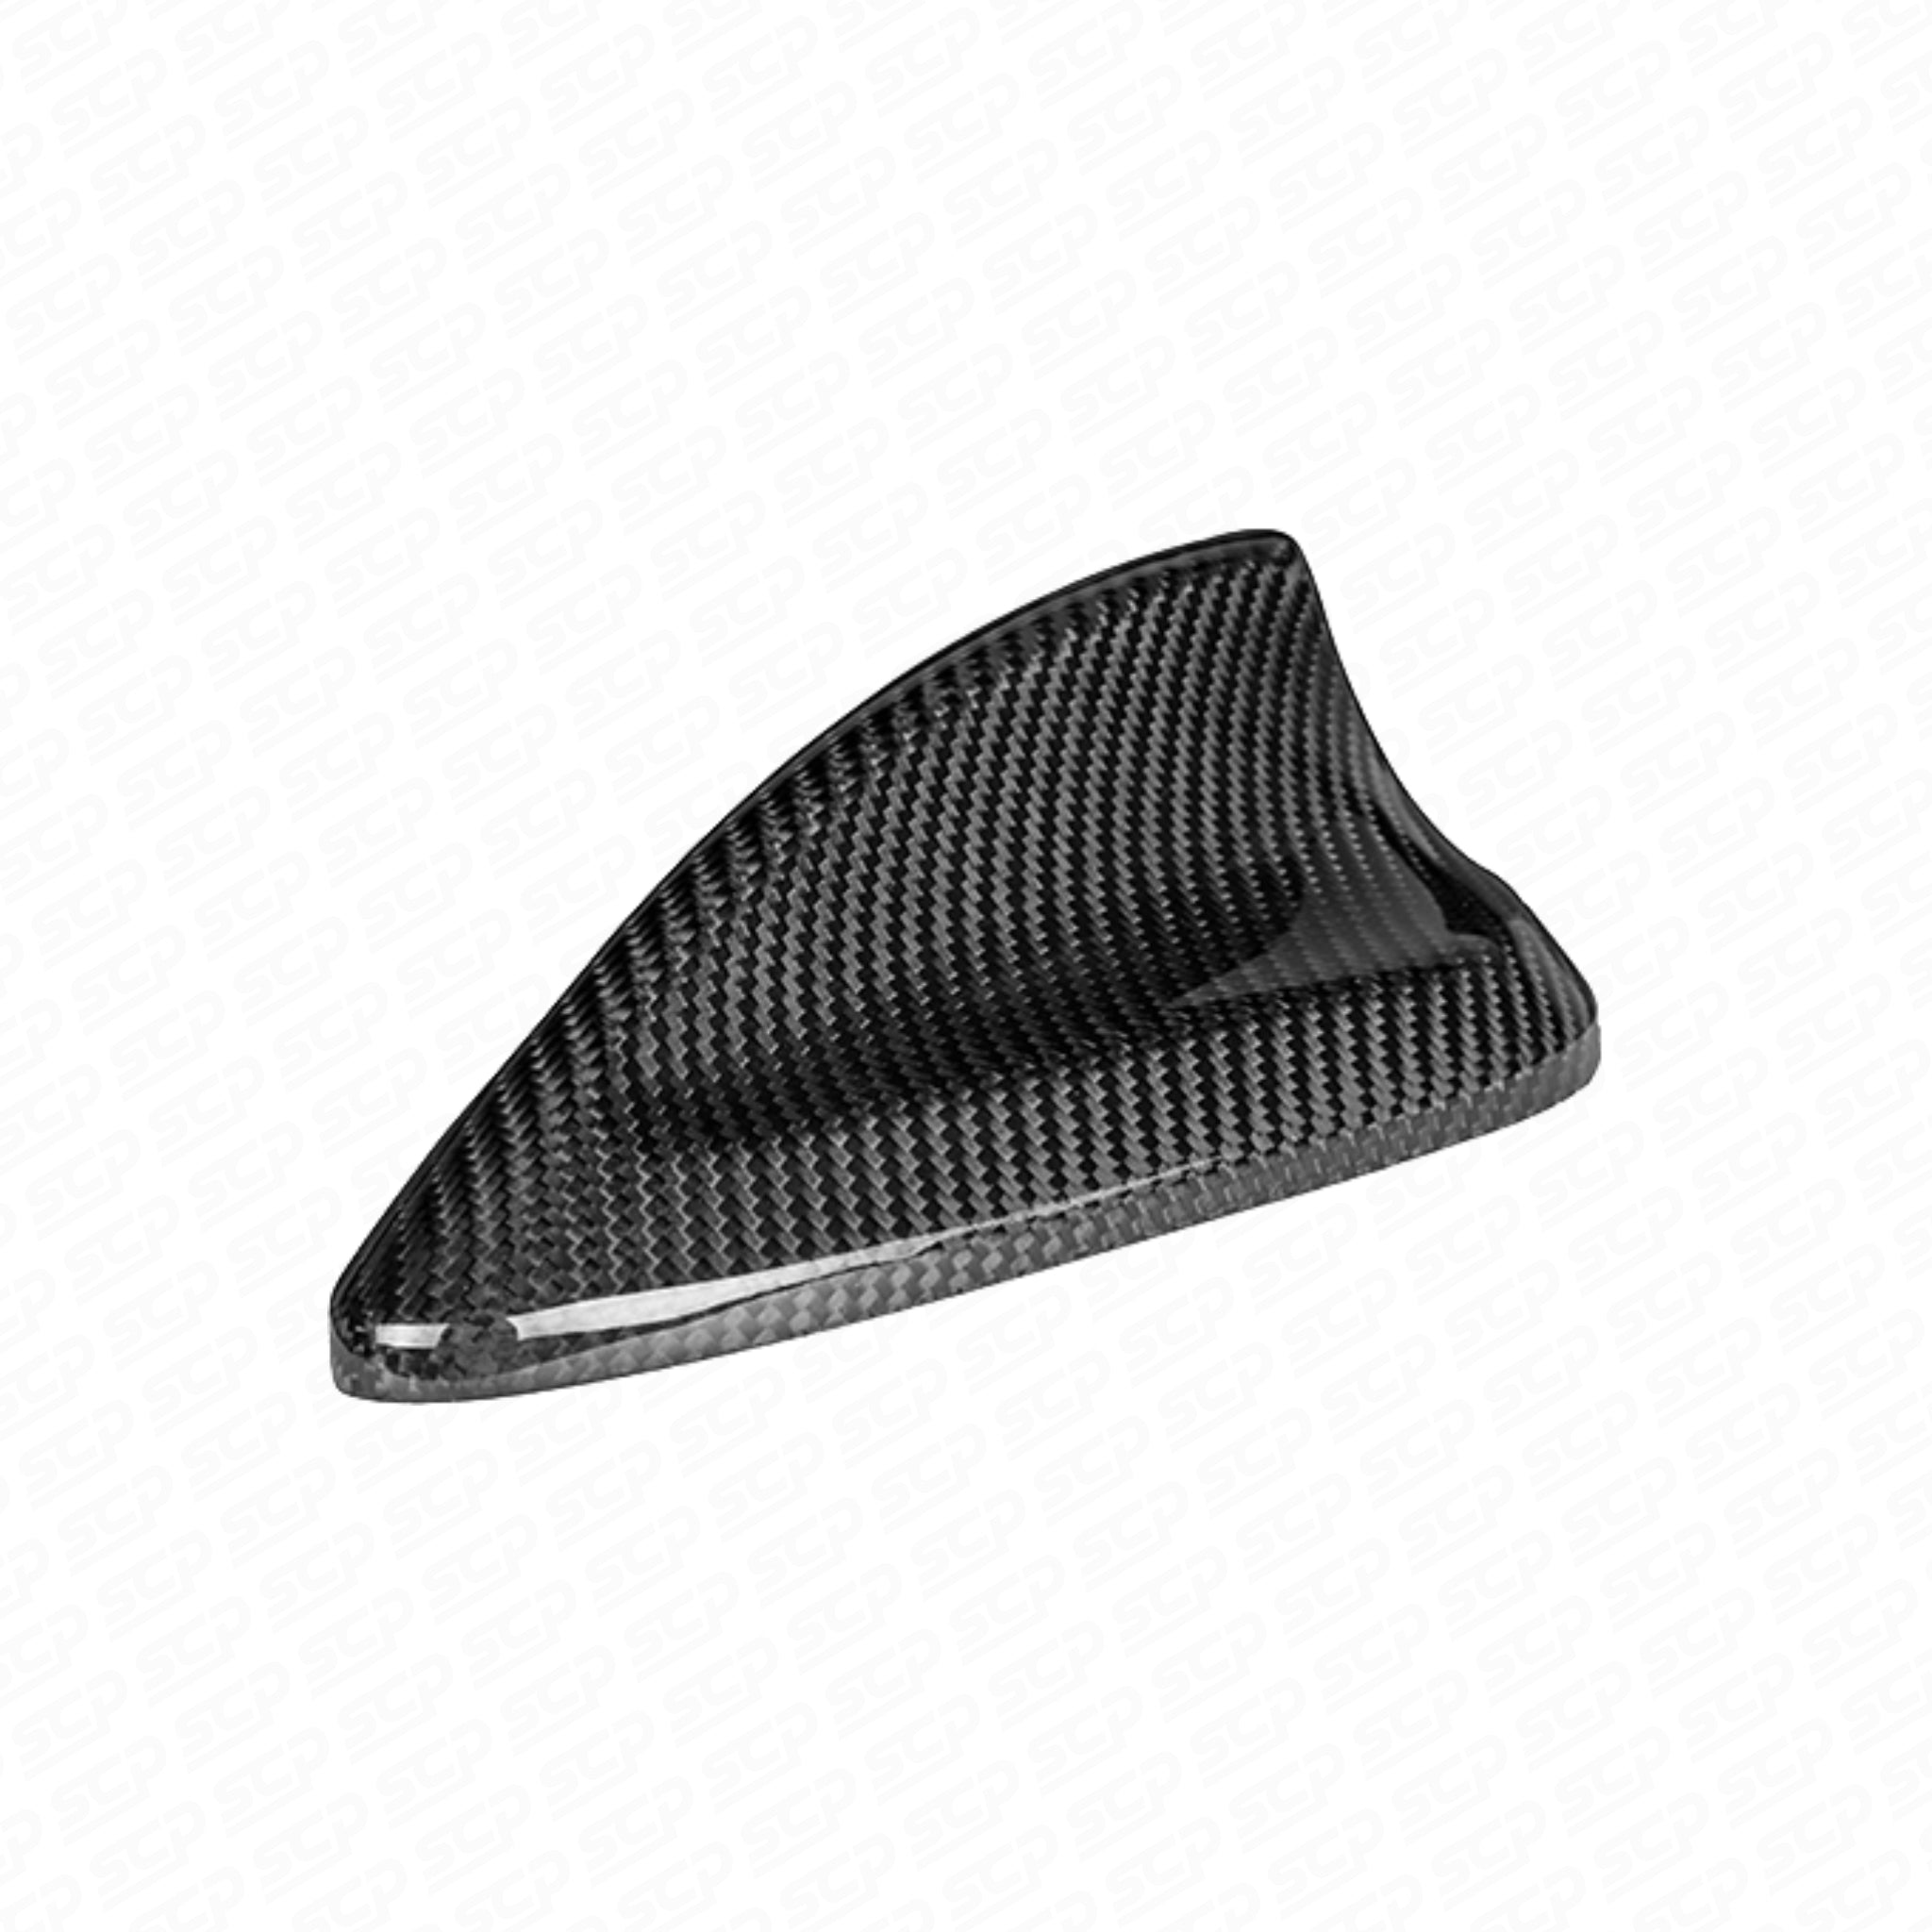 BMW Aerial Cover for F-Series and G-Series (Variant 1)